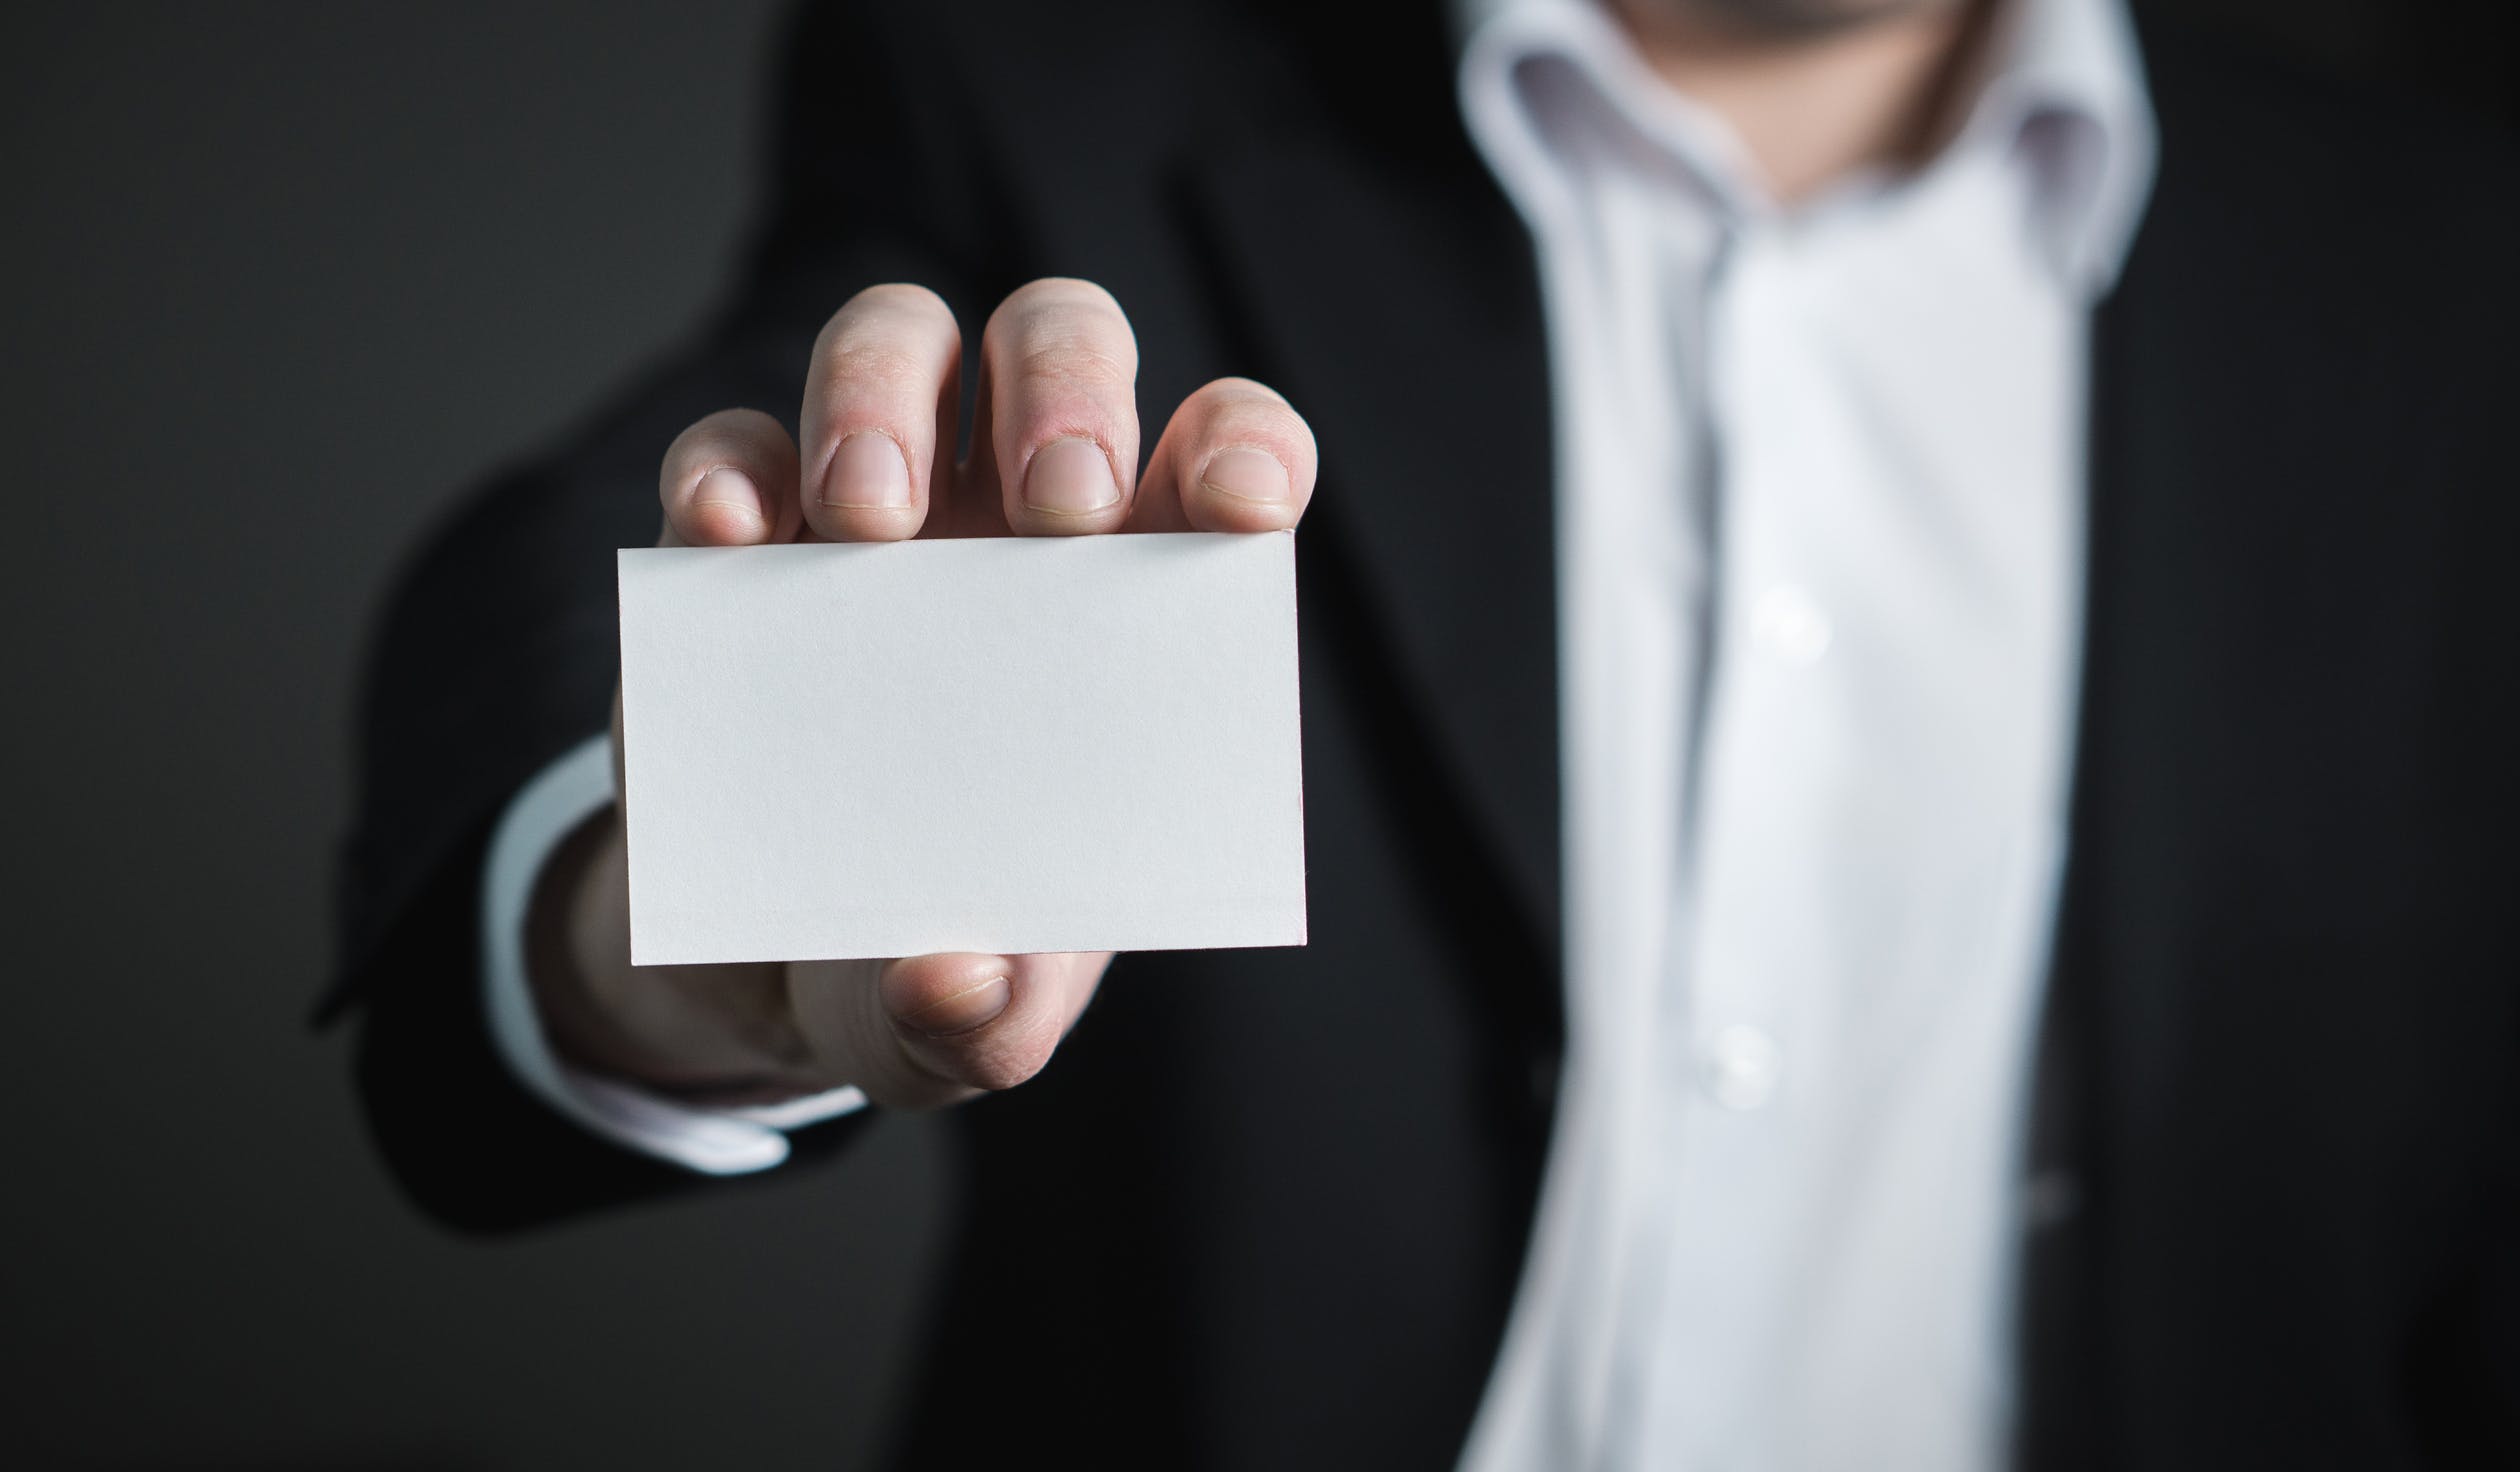 How to design an effective business card